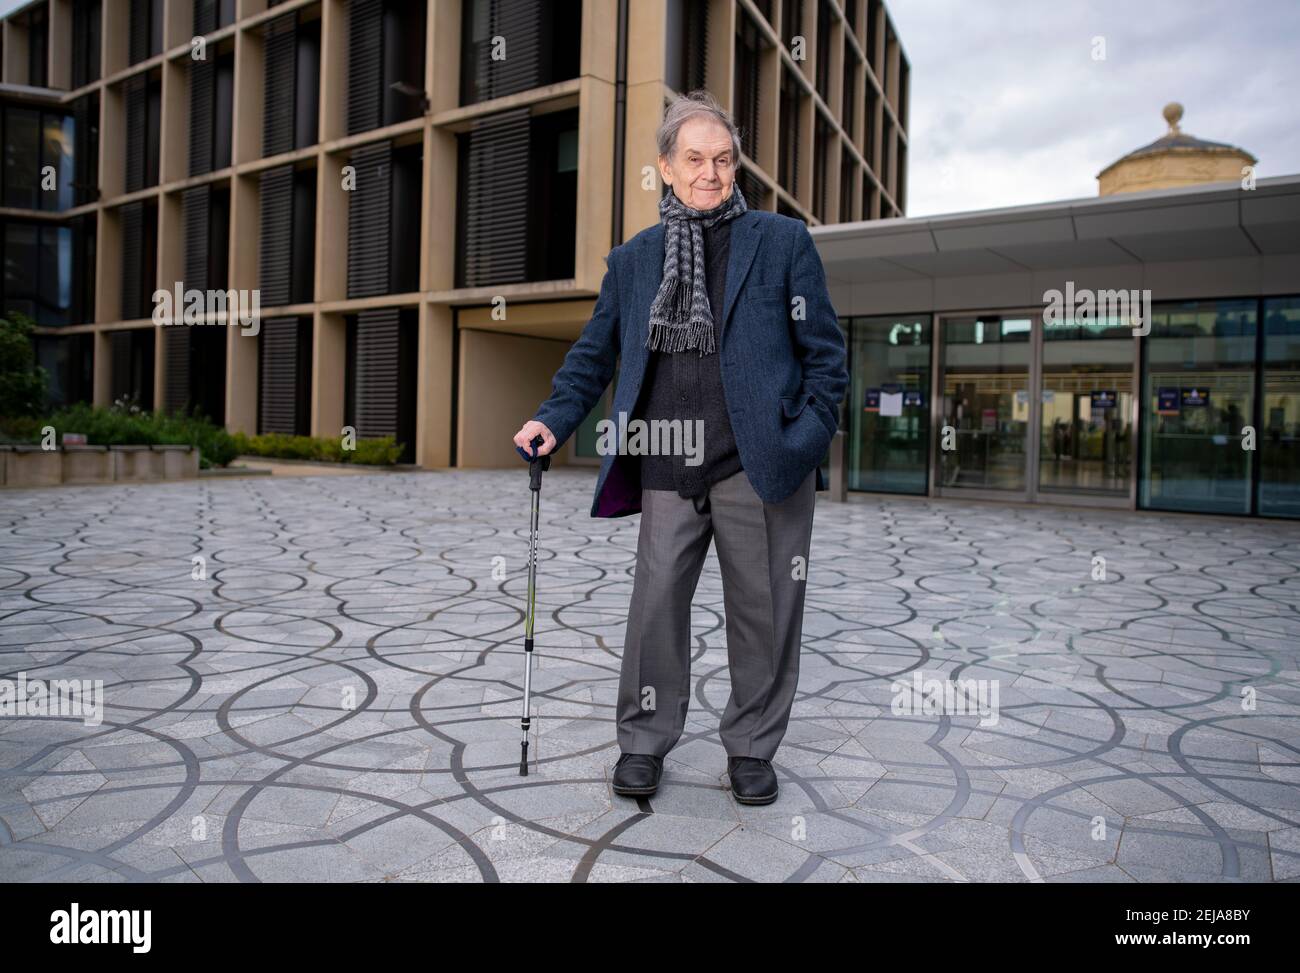 Sir Roger Penrose, Emeritus Professor at the Mathematical Institute of the University of Oxford. He was awarded the Nobel Prize for Physics in 2020. Stock Photo